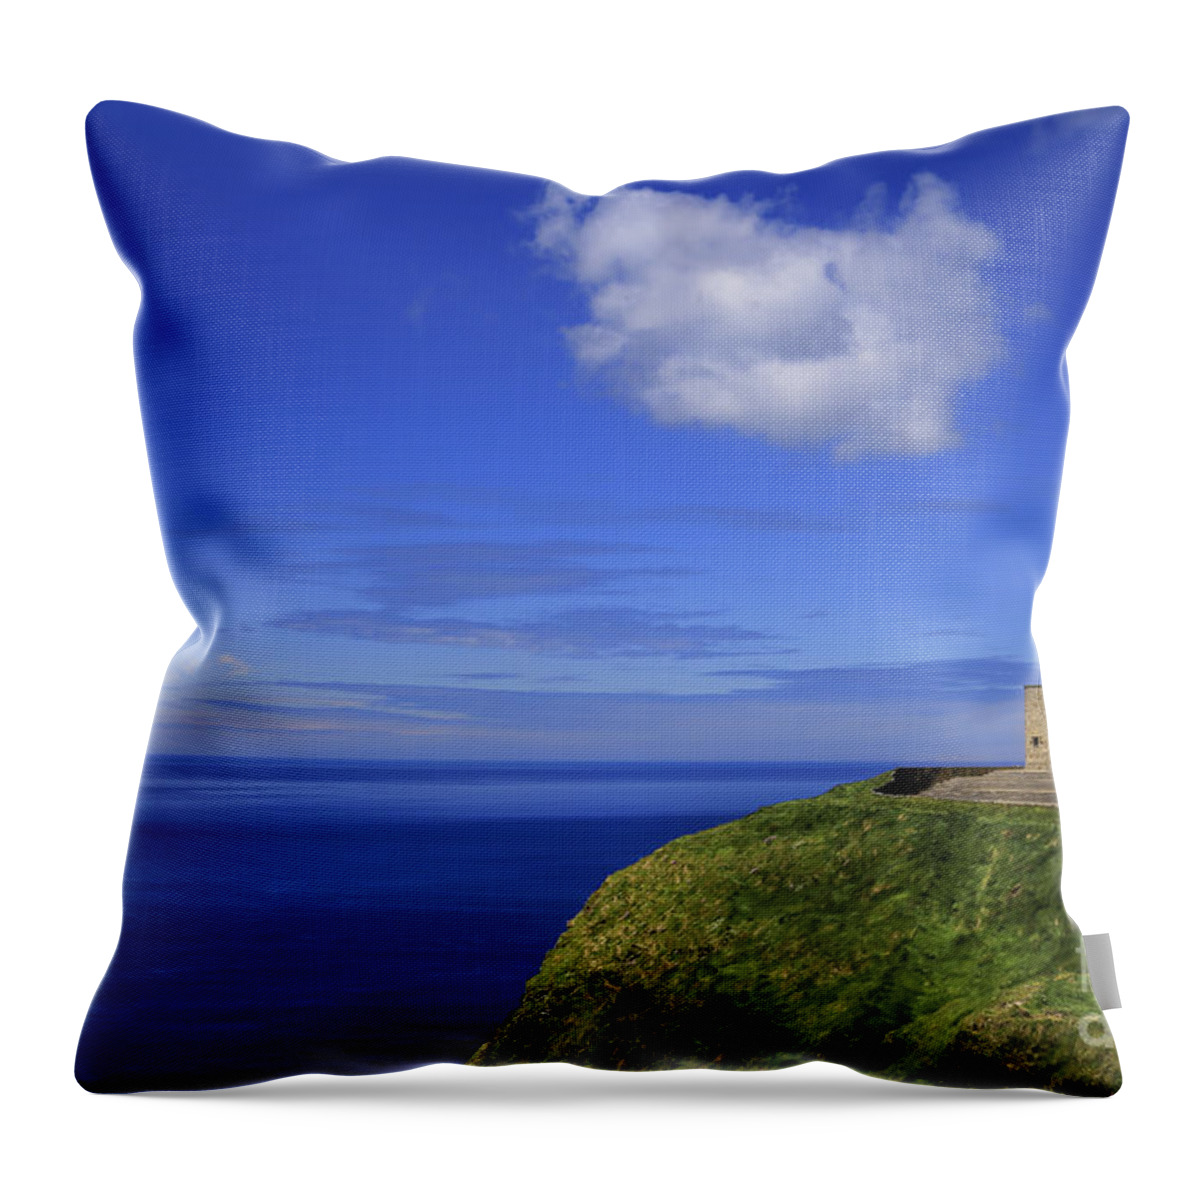 Tower Throw Pillow featuring the photograph Emerging Castleland by Evelina Kremsdorf